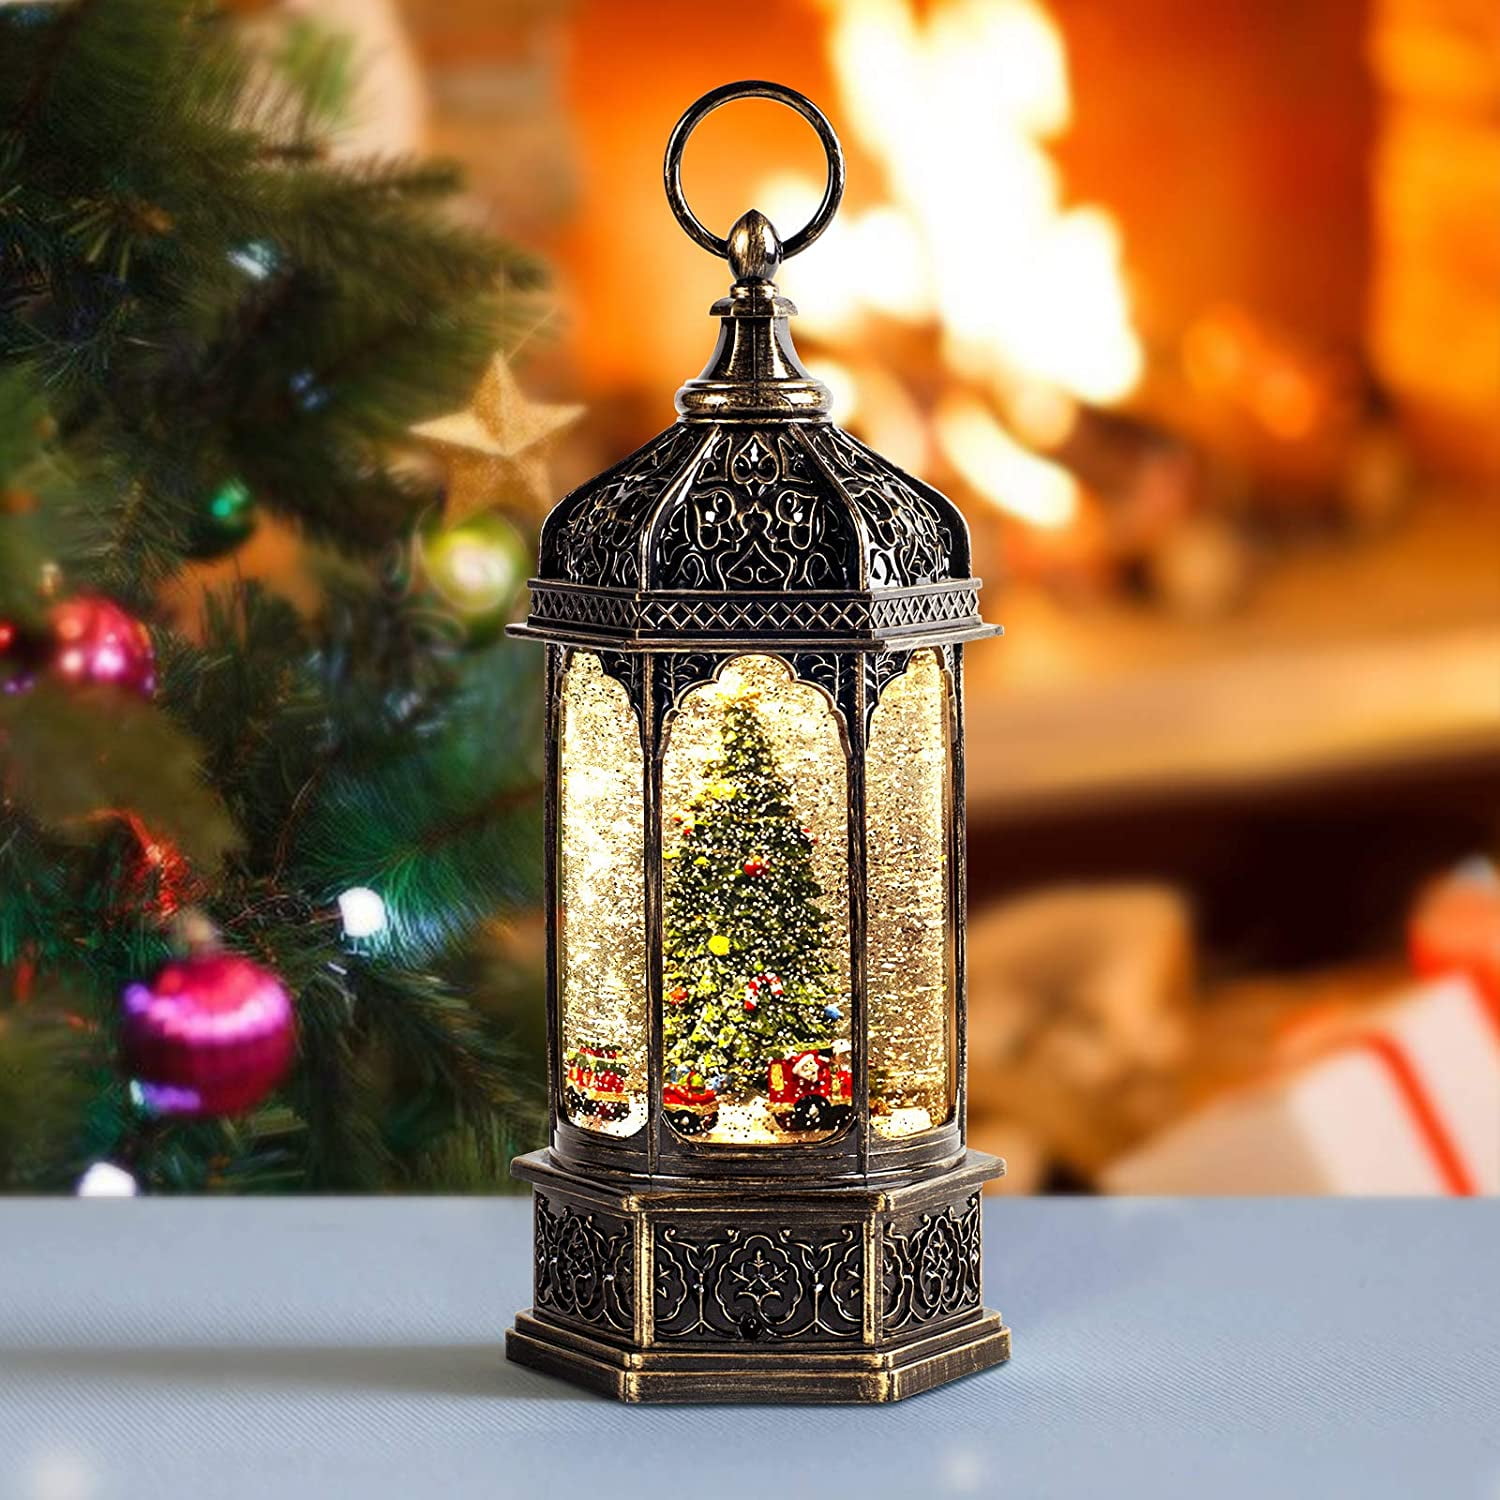 MOFANG FAMILY Christmas Snow Globe Lantern with Swirling Water Glittering Snowman Scence Xmas Hanging Lantern for Christmas Home Decoration Tabletop Decorative and Gift Holidays Home Decor